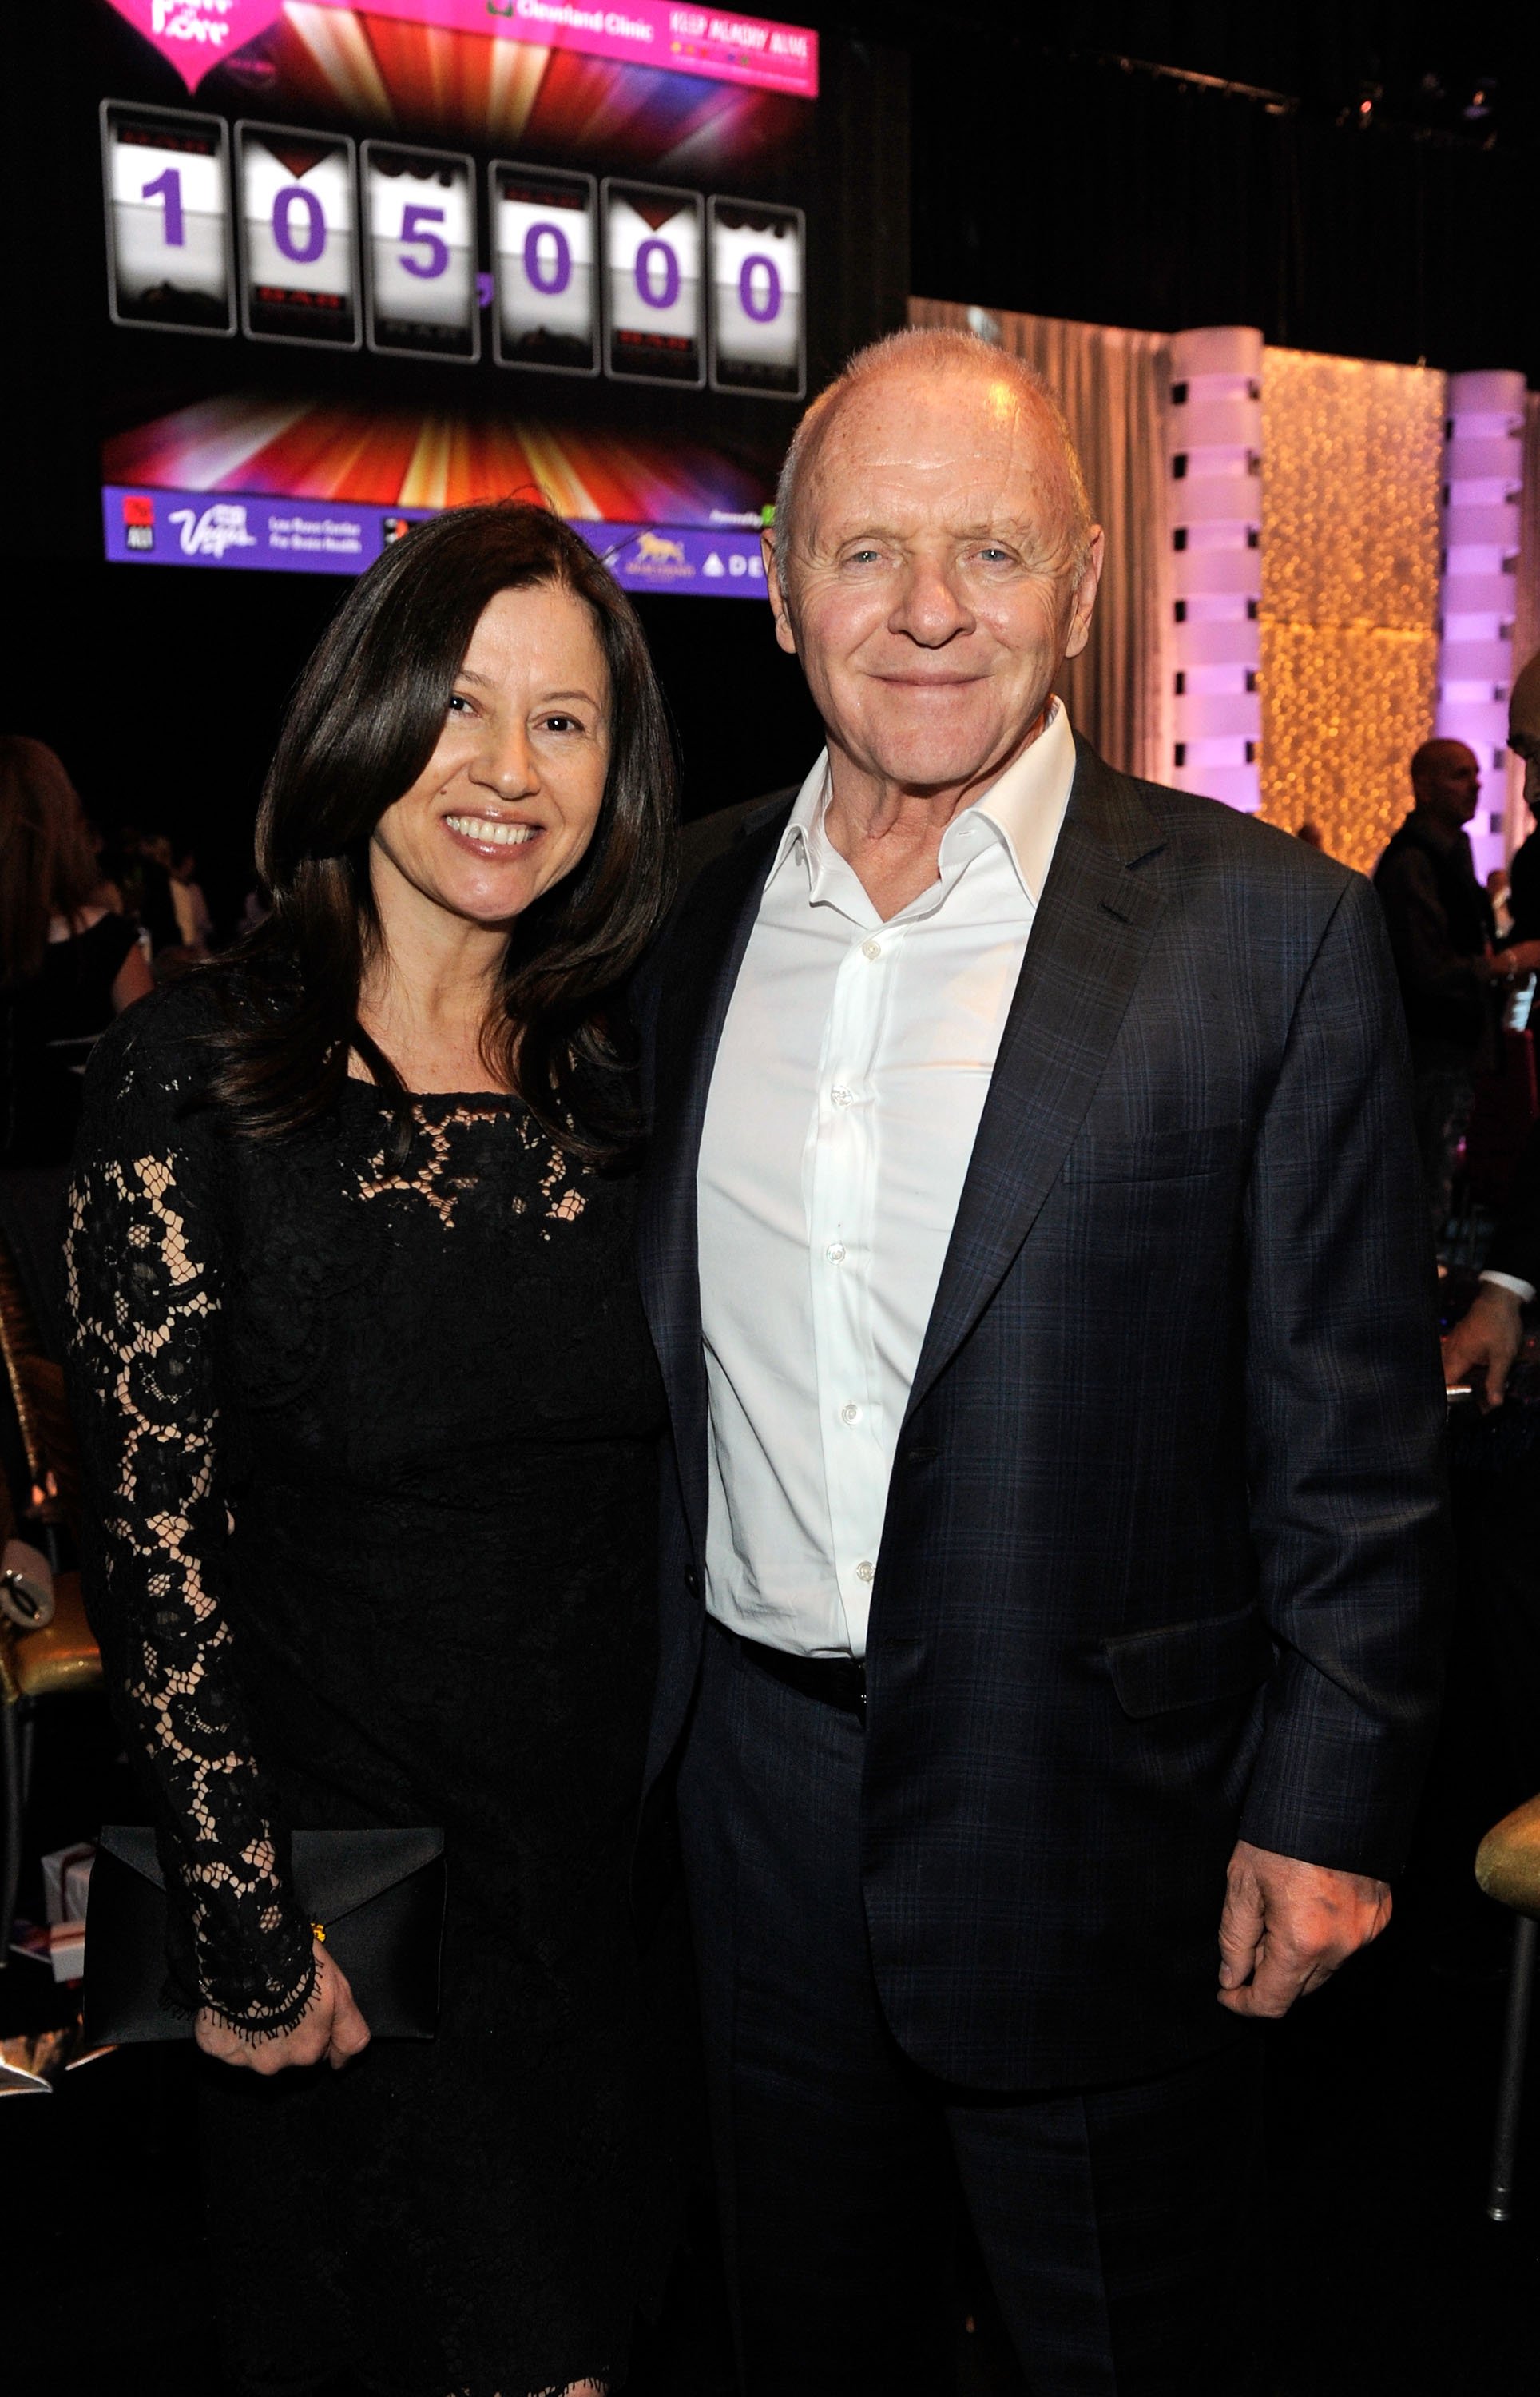 Anthony Hopkins and Stella Arroyave attend the Keep Memory Alive foundation's "Power of Love Gala" celebrating Muhammad Ali's 70th birthday on February 18, 2012, in Las Vegas, Nevada. | Source: Getty Images